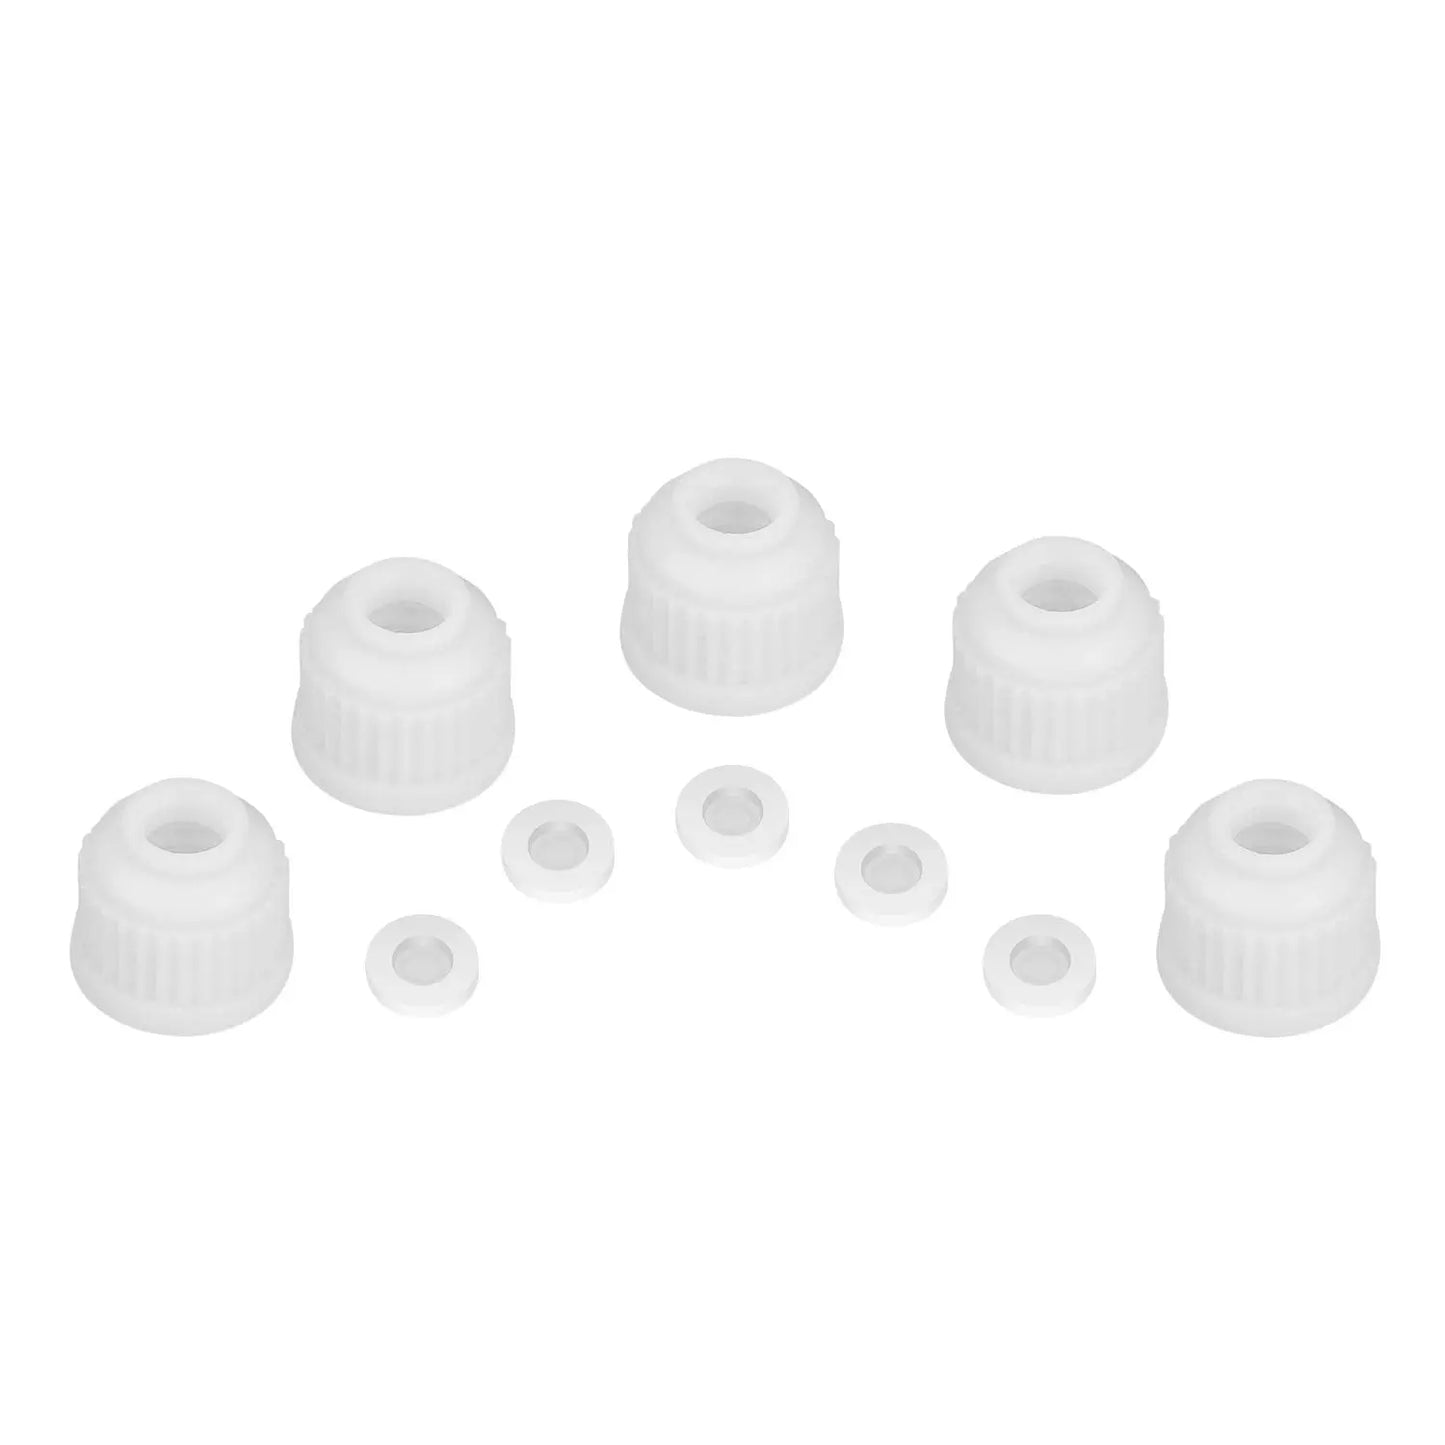 Plastic Screw Caps for Thermometer Inlet Adapter 14/20, 19/22 and 24/40 - StonyLab Caps Sleeves 5-Pack